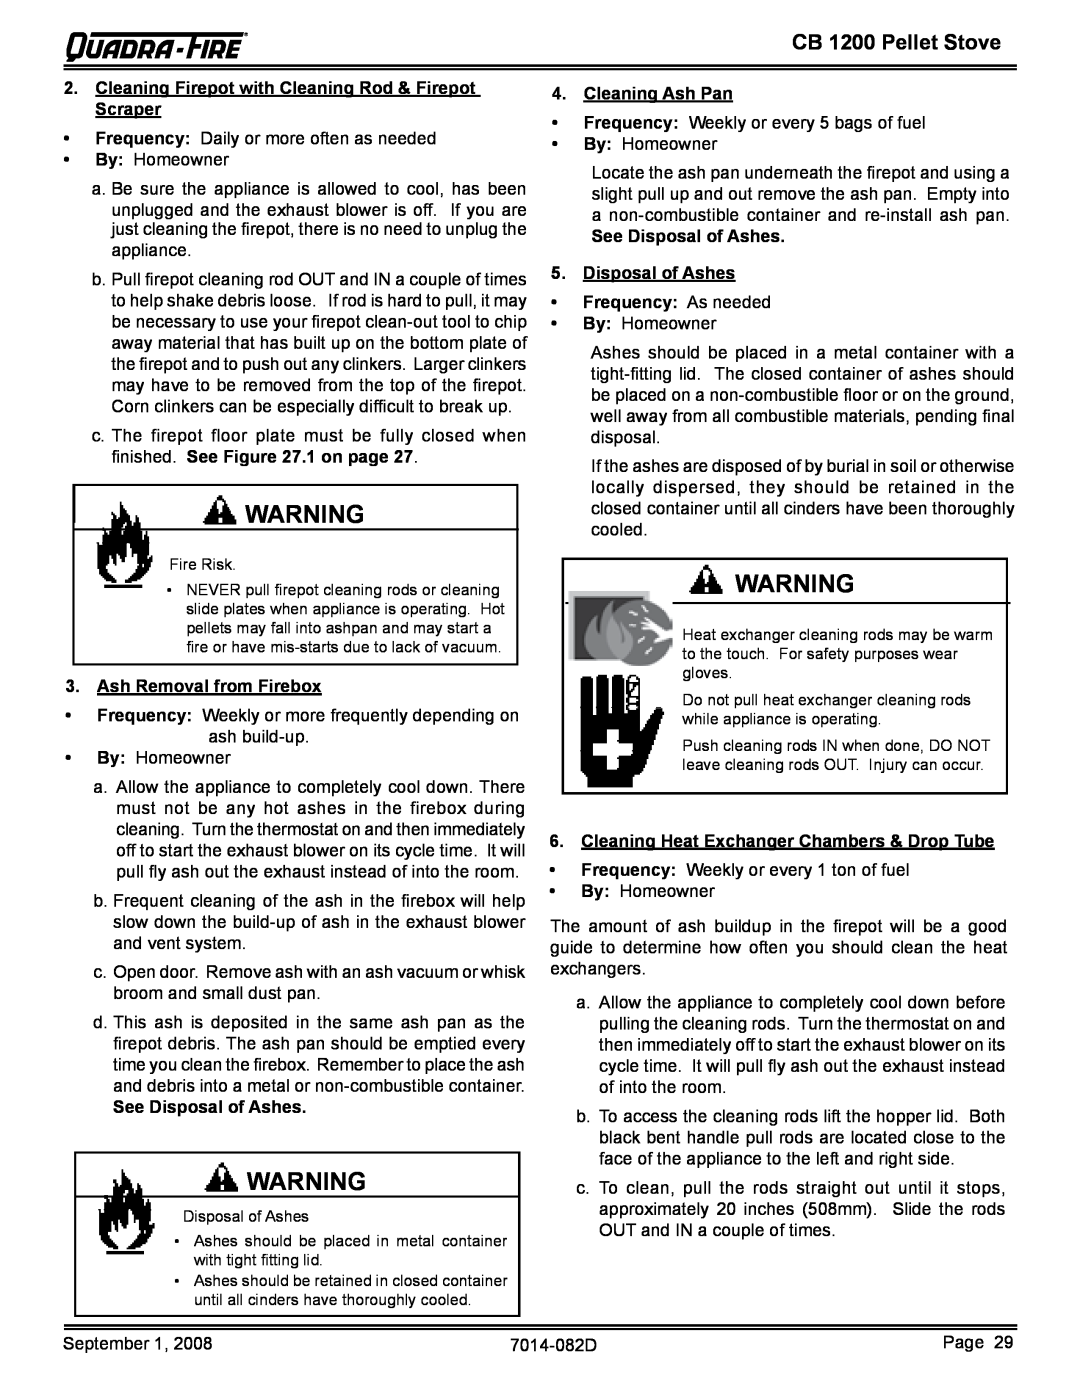 Quadra-Fire CB1200-B owner manual CB 1200 Pellet Stove, Ash Removal from Firebox, See Disposal of Ashes, Cleaning Ash Pan 